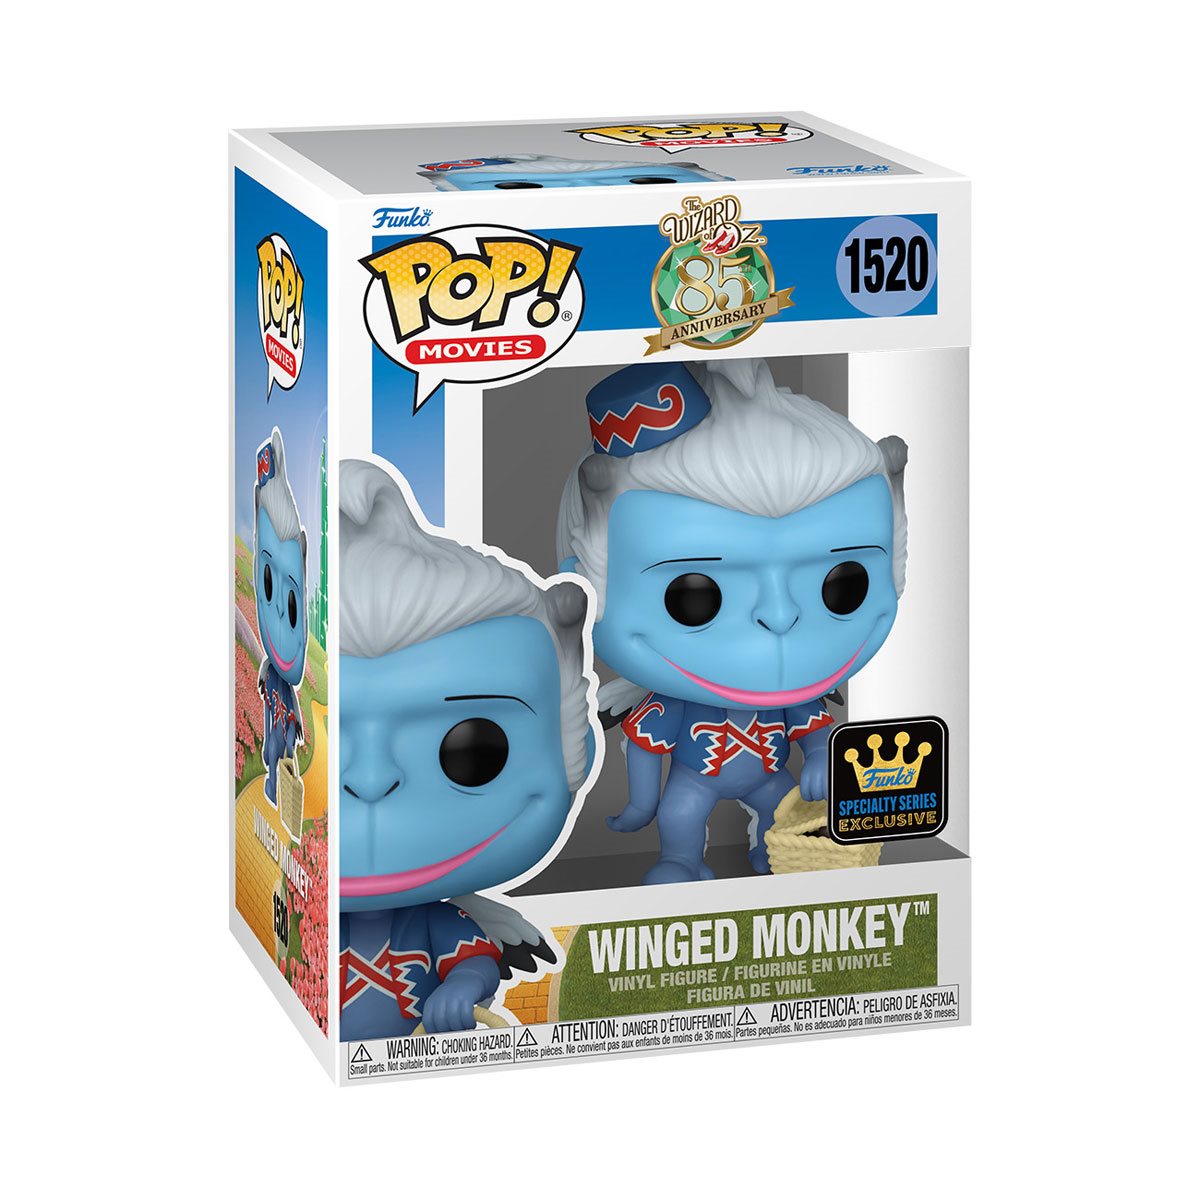 Funko Pop! Movies: Wizard Of Oz 85th Anniversary: Winged Monkey (Specialty Series Exclusive)